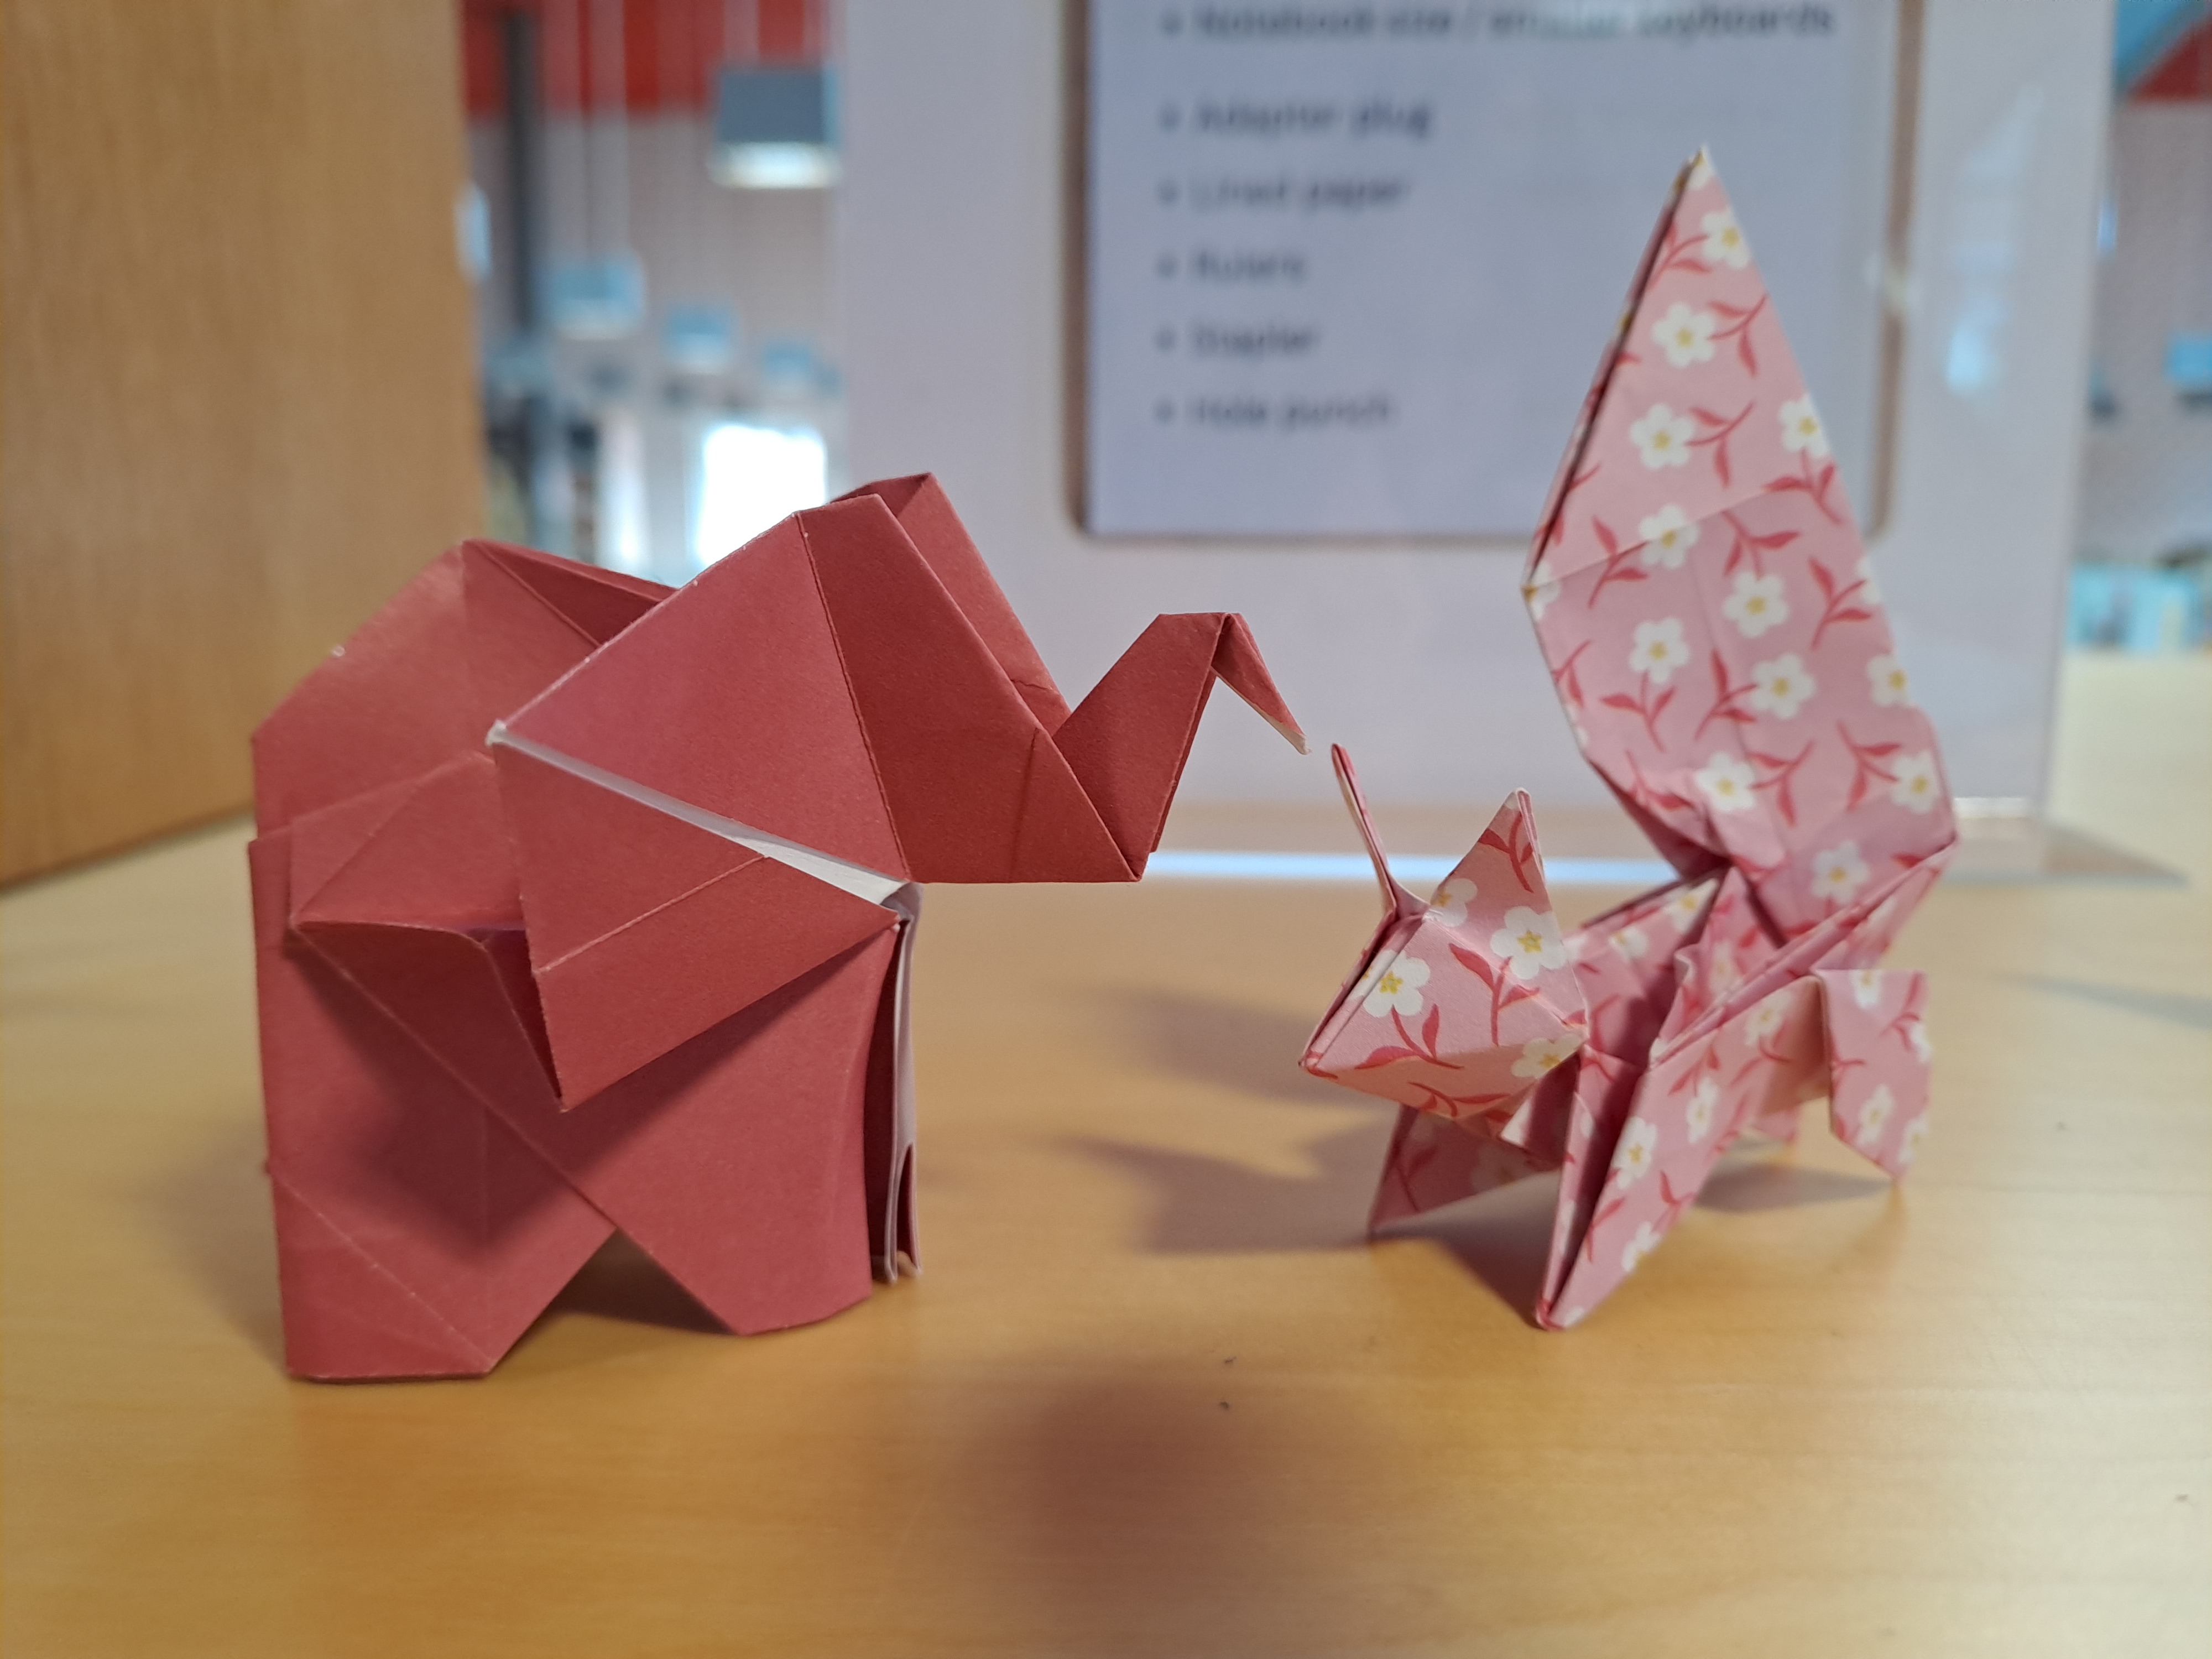 An origami elephant and squirrel